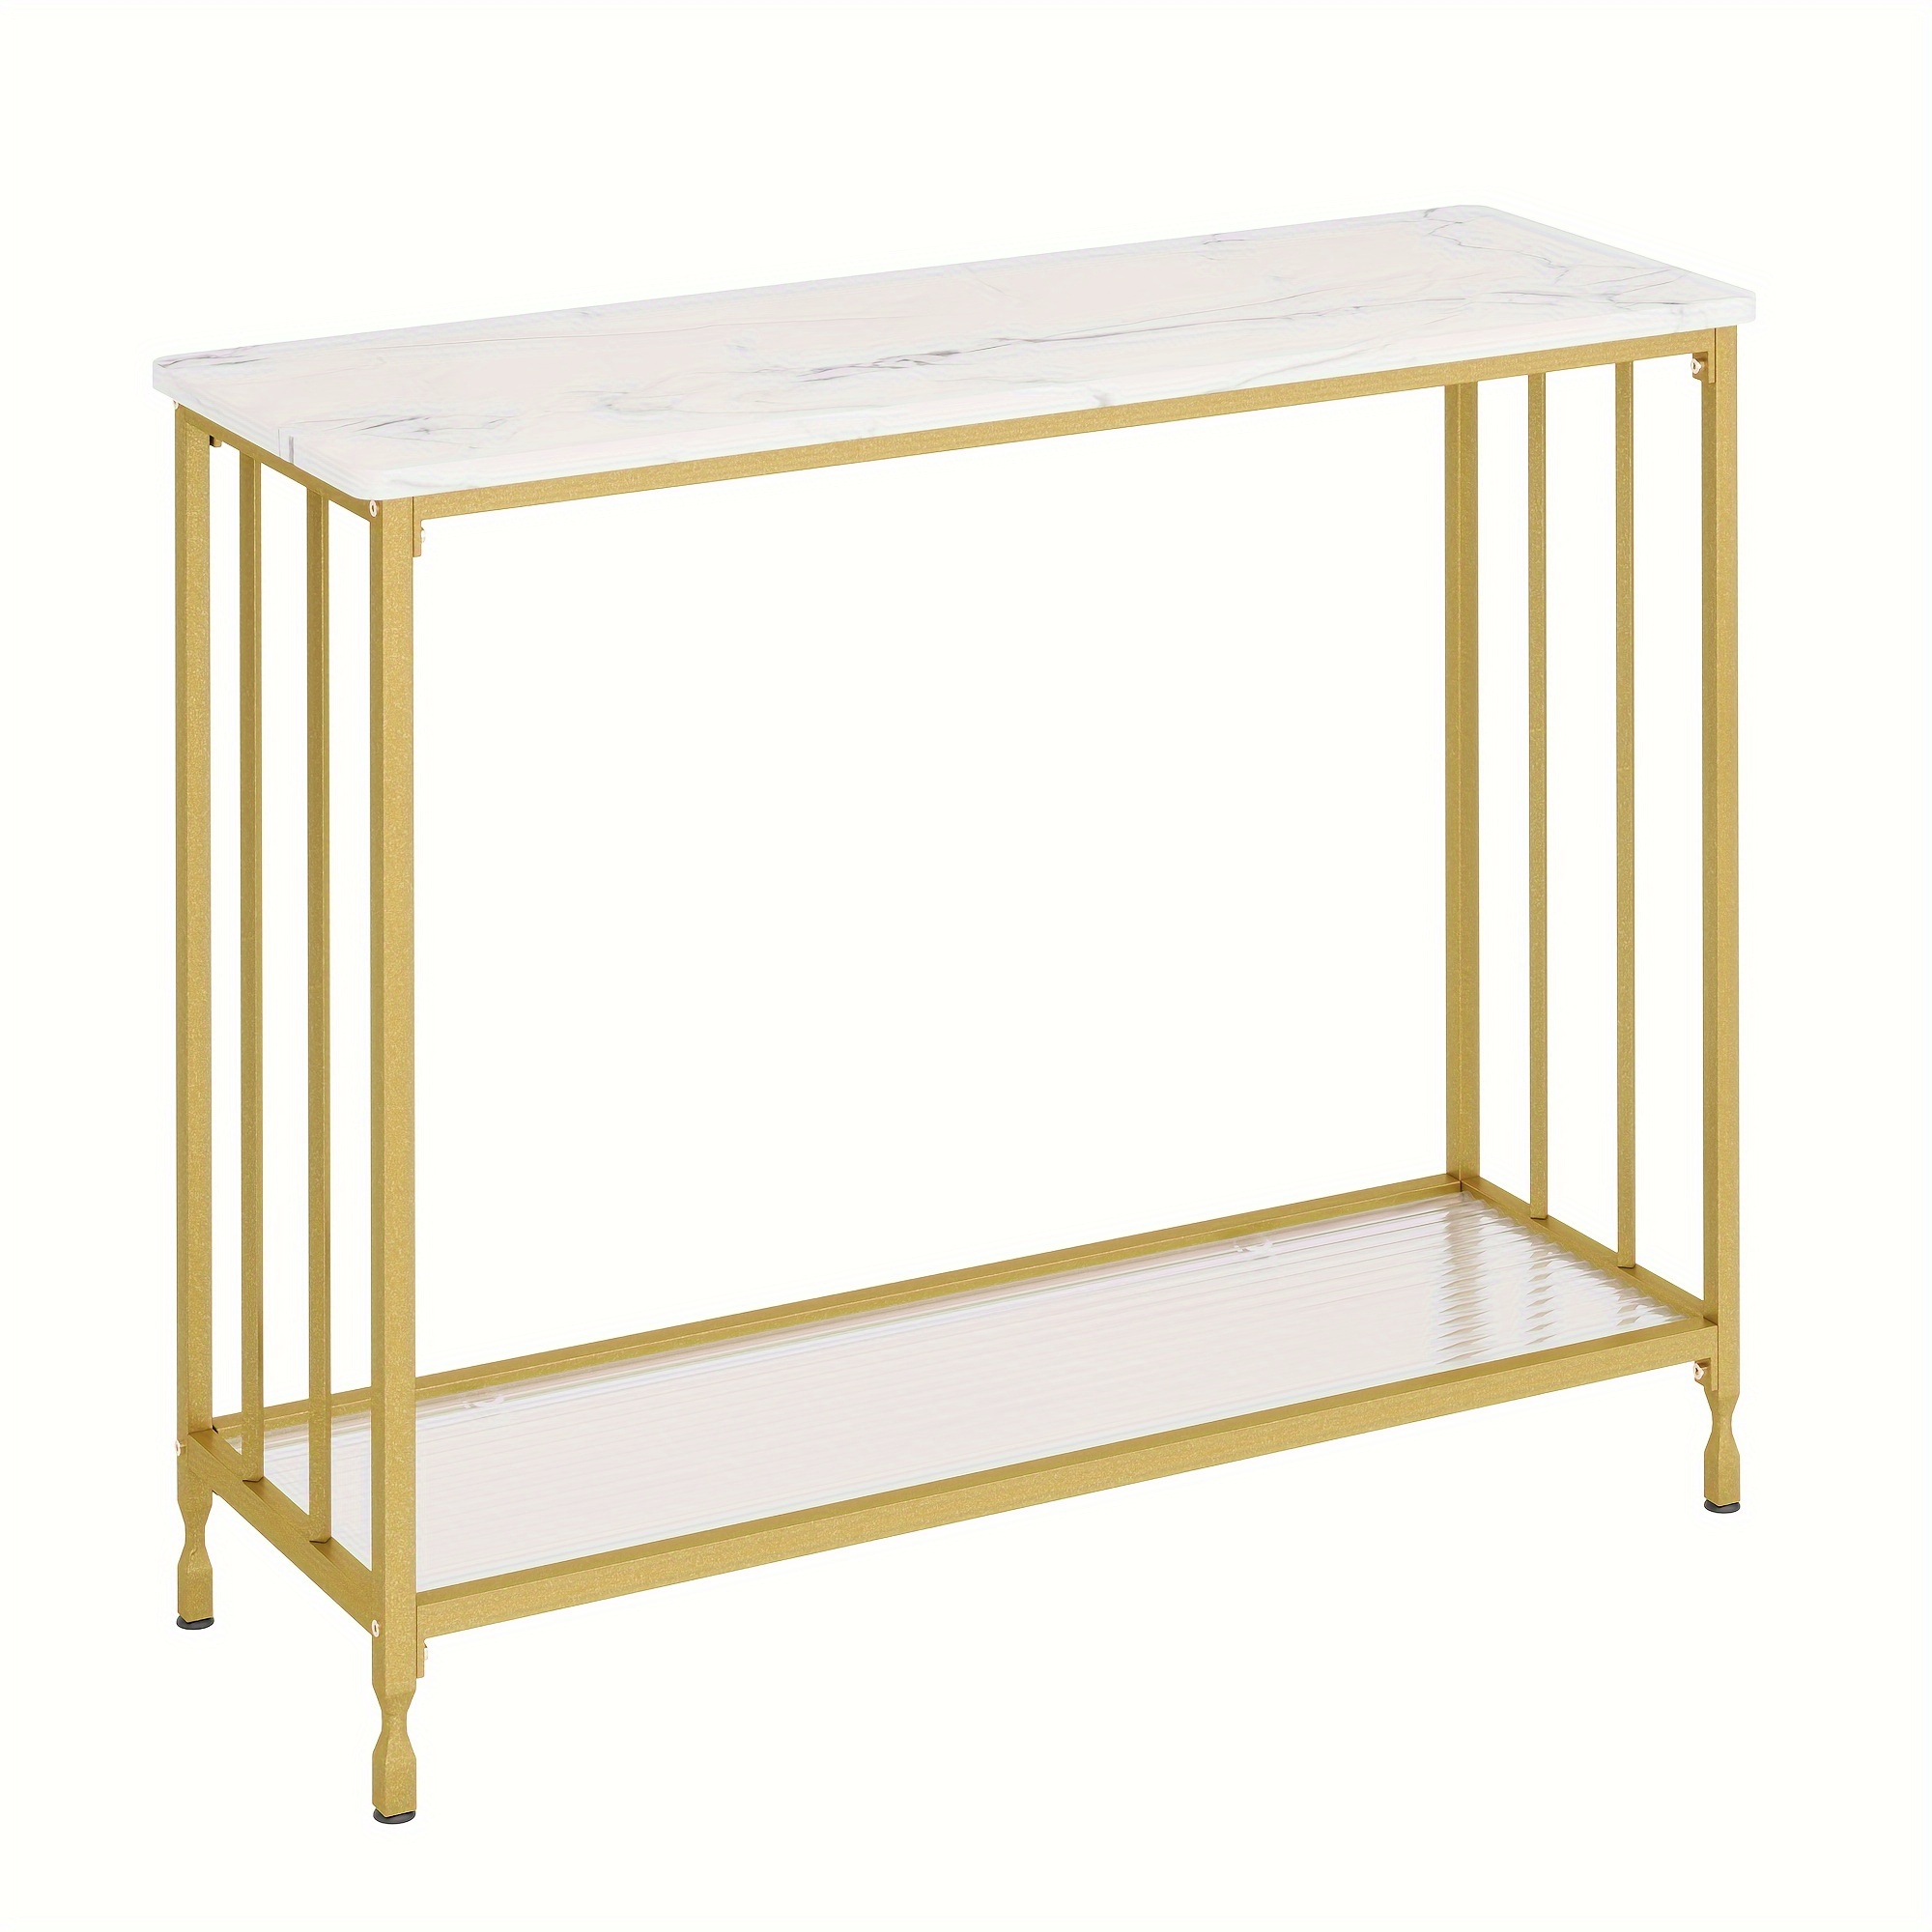 

Console Table, Narrow Entryway Table With Glass Shelf And Metal Frame, 33.5 In Behind Couch Table Industrial Hallway Table For Living Room, Foyer, Bedroom, Modern Gold